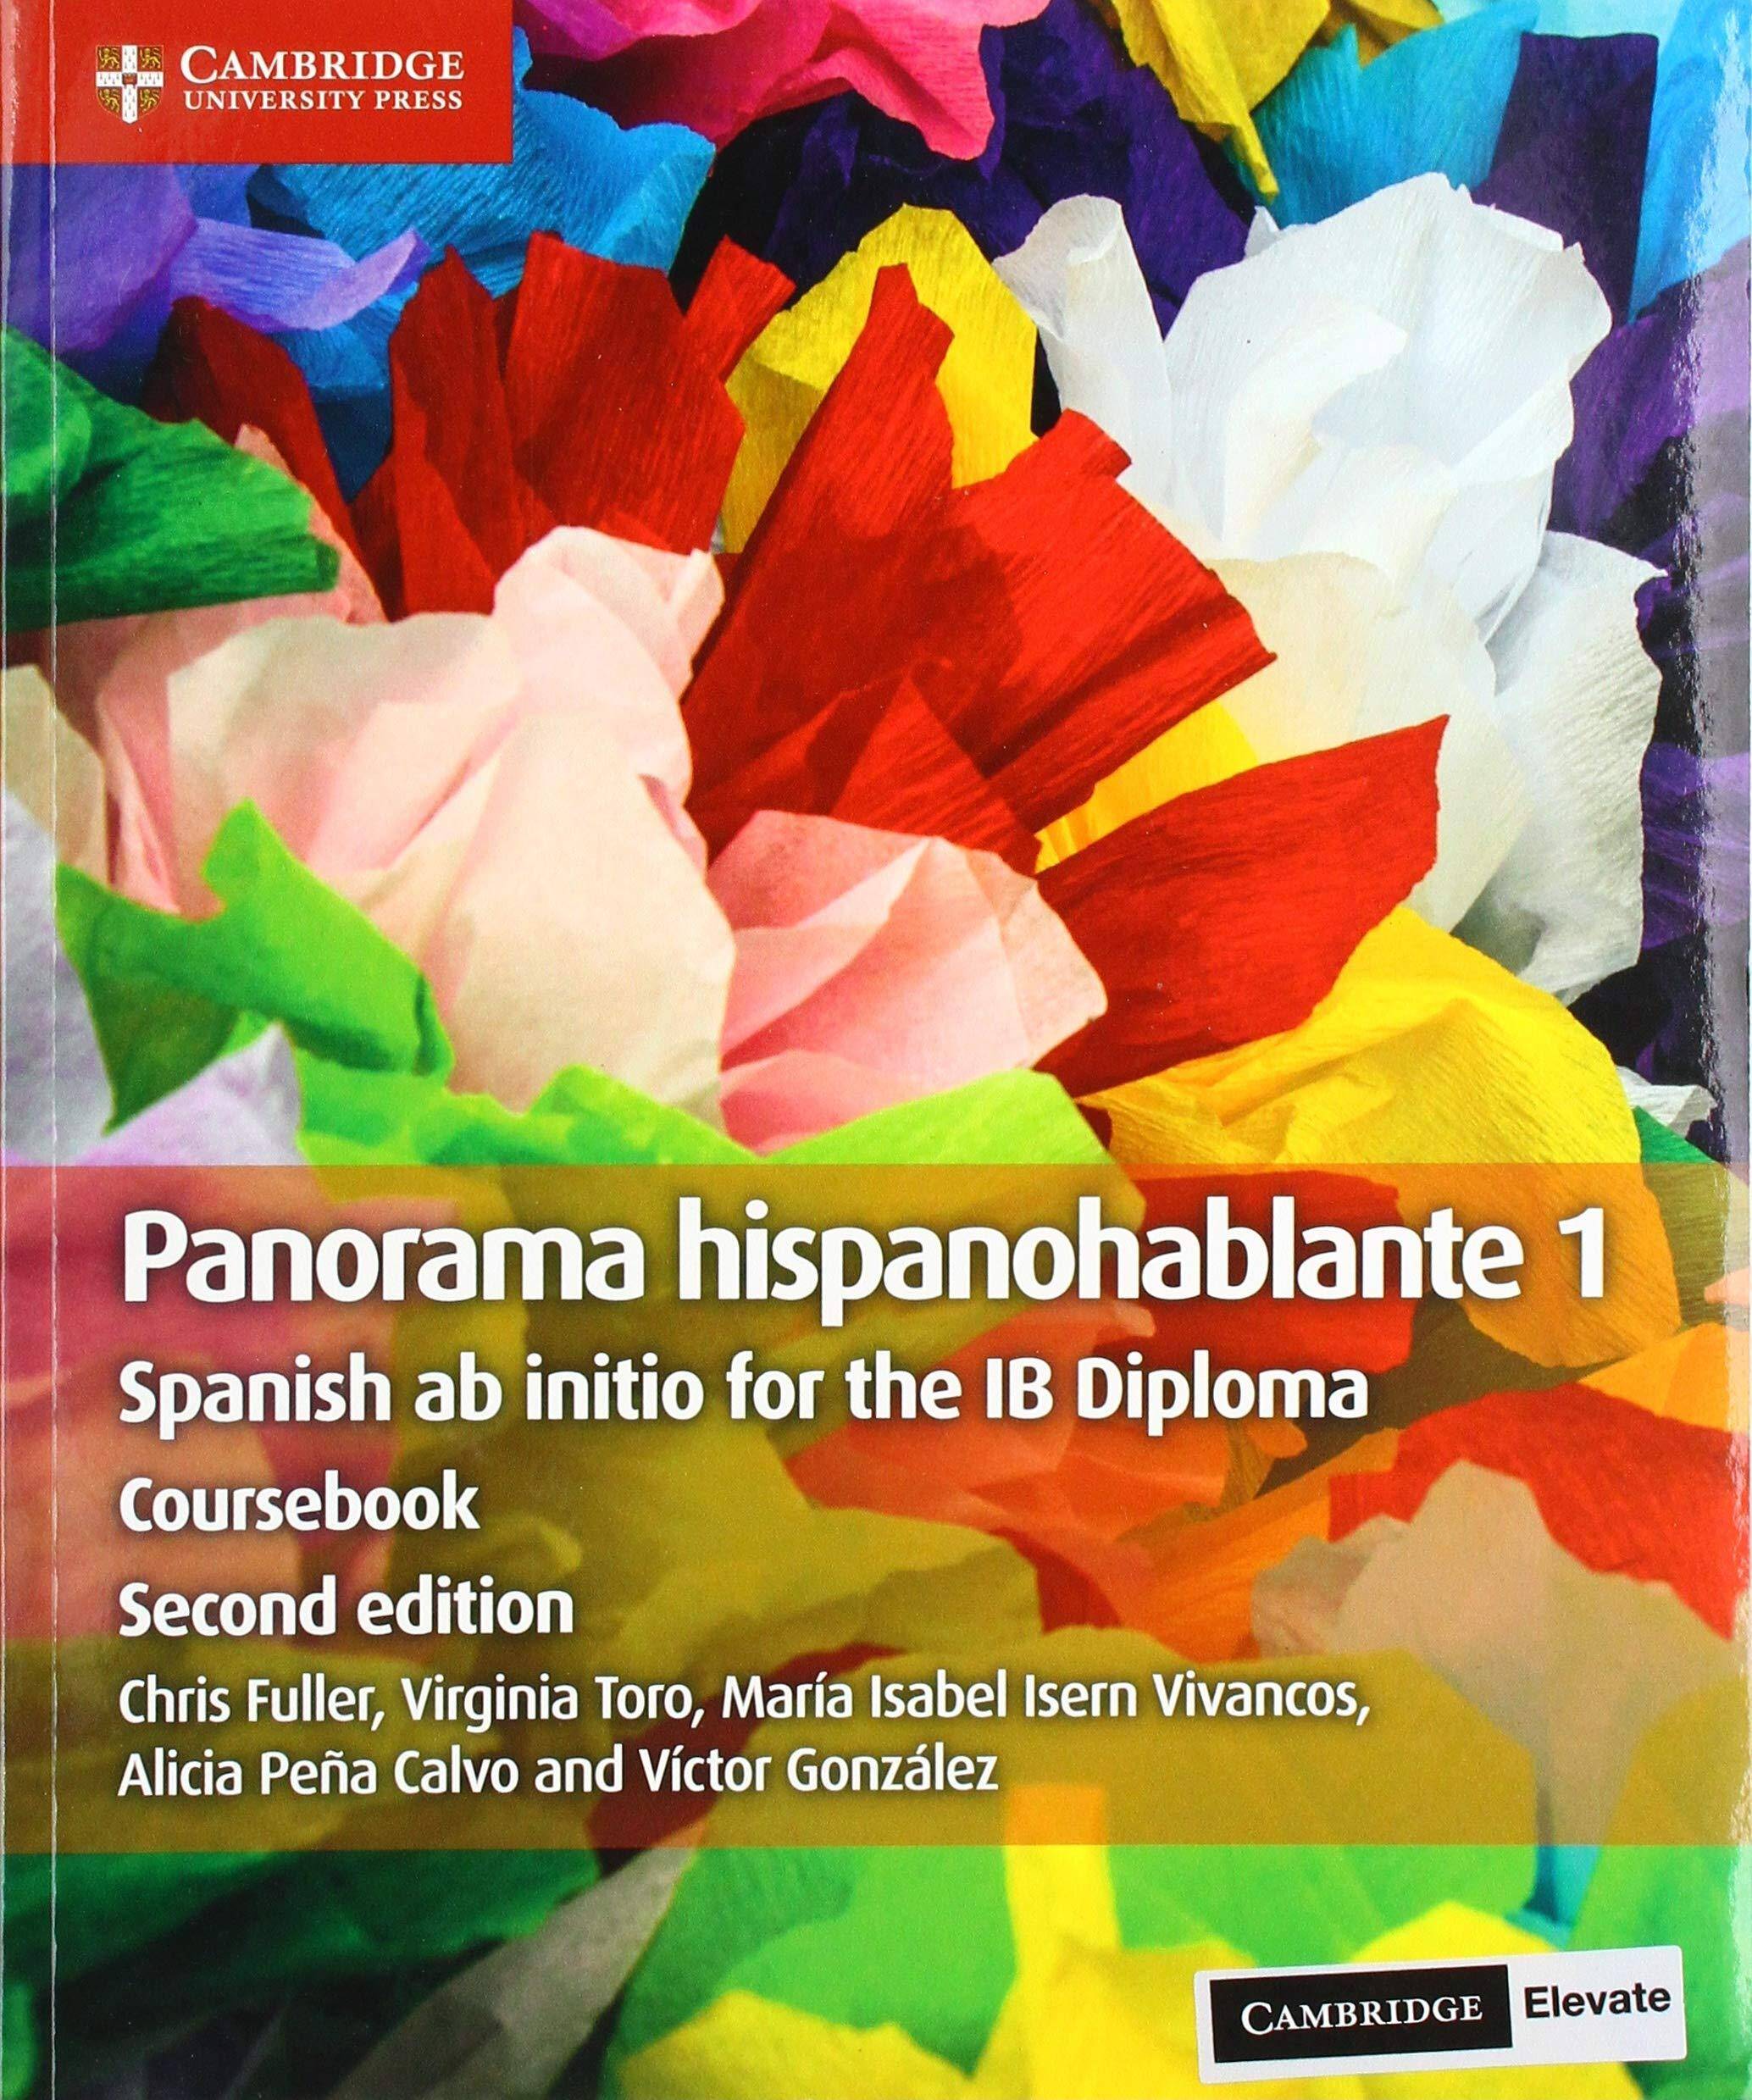 Panorama hispanohablante 1 Coursebook with Digital Access (2 Years) : Spanish ab initio for the IB Diploma